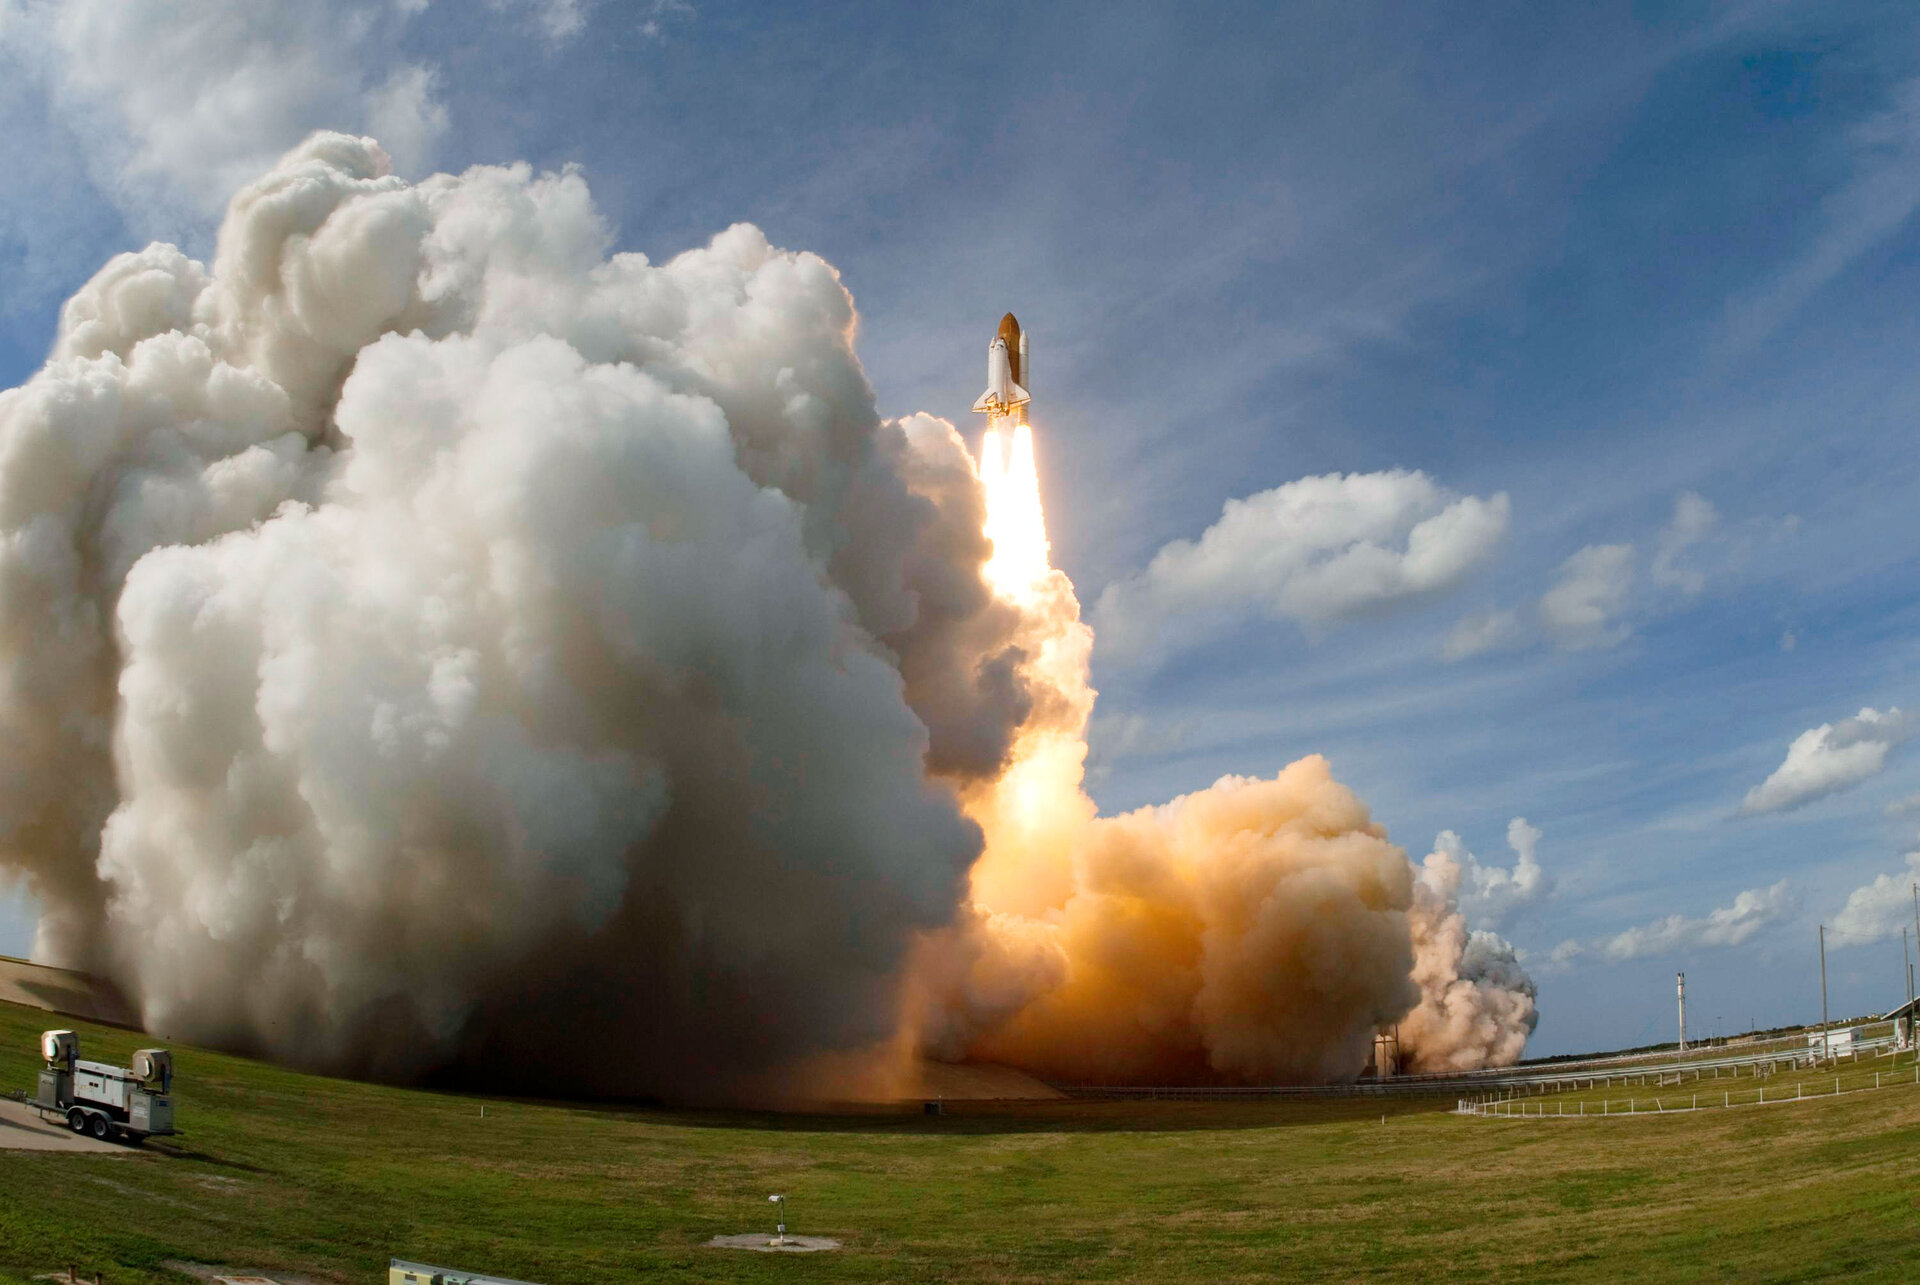 Columbus launched onboard Space Shuttle Atlantis